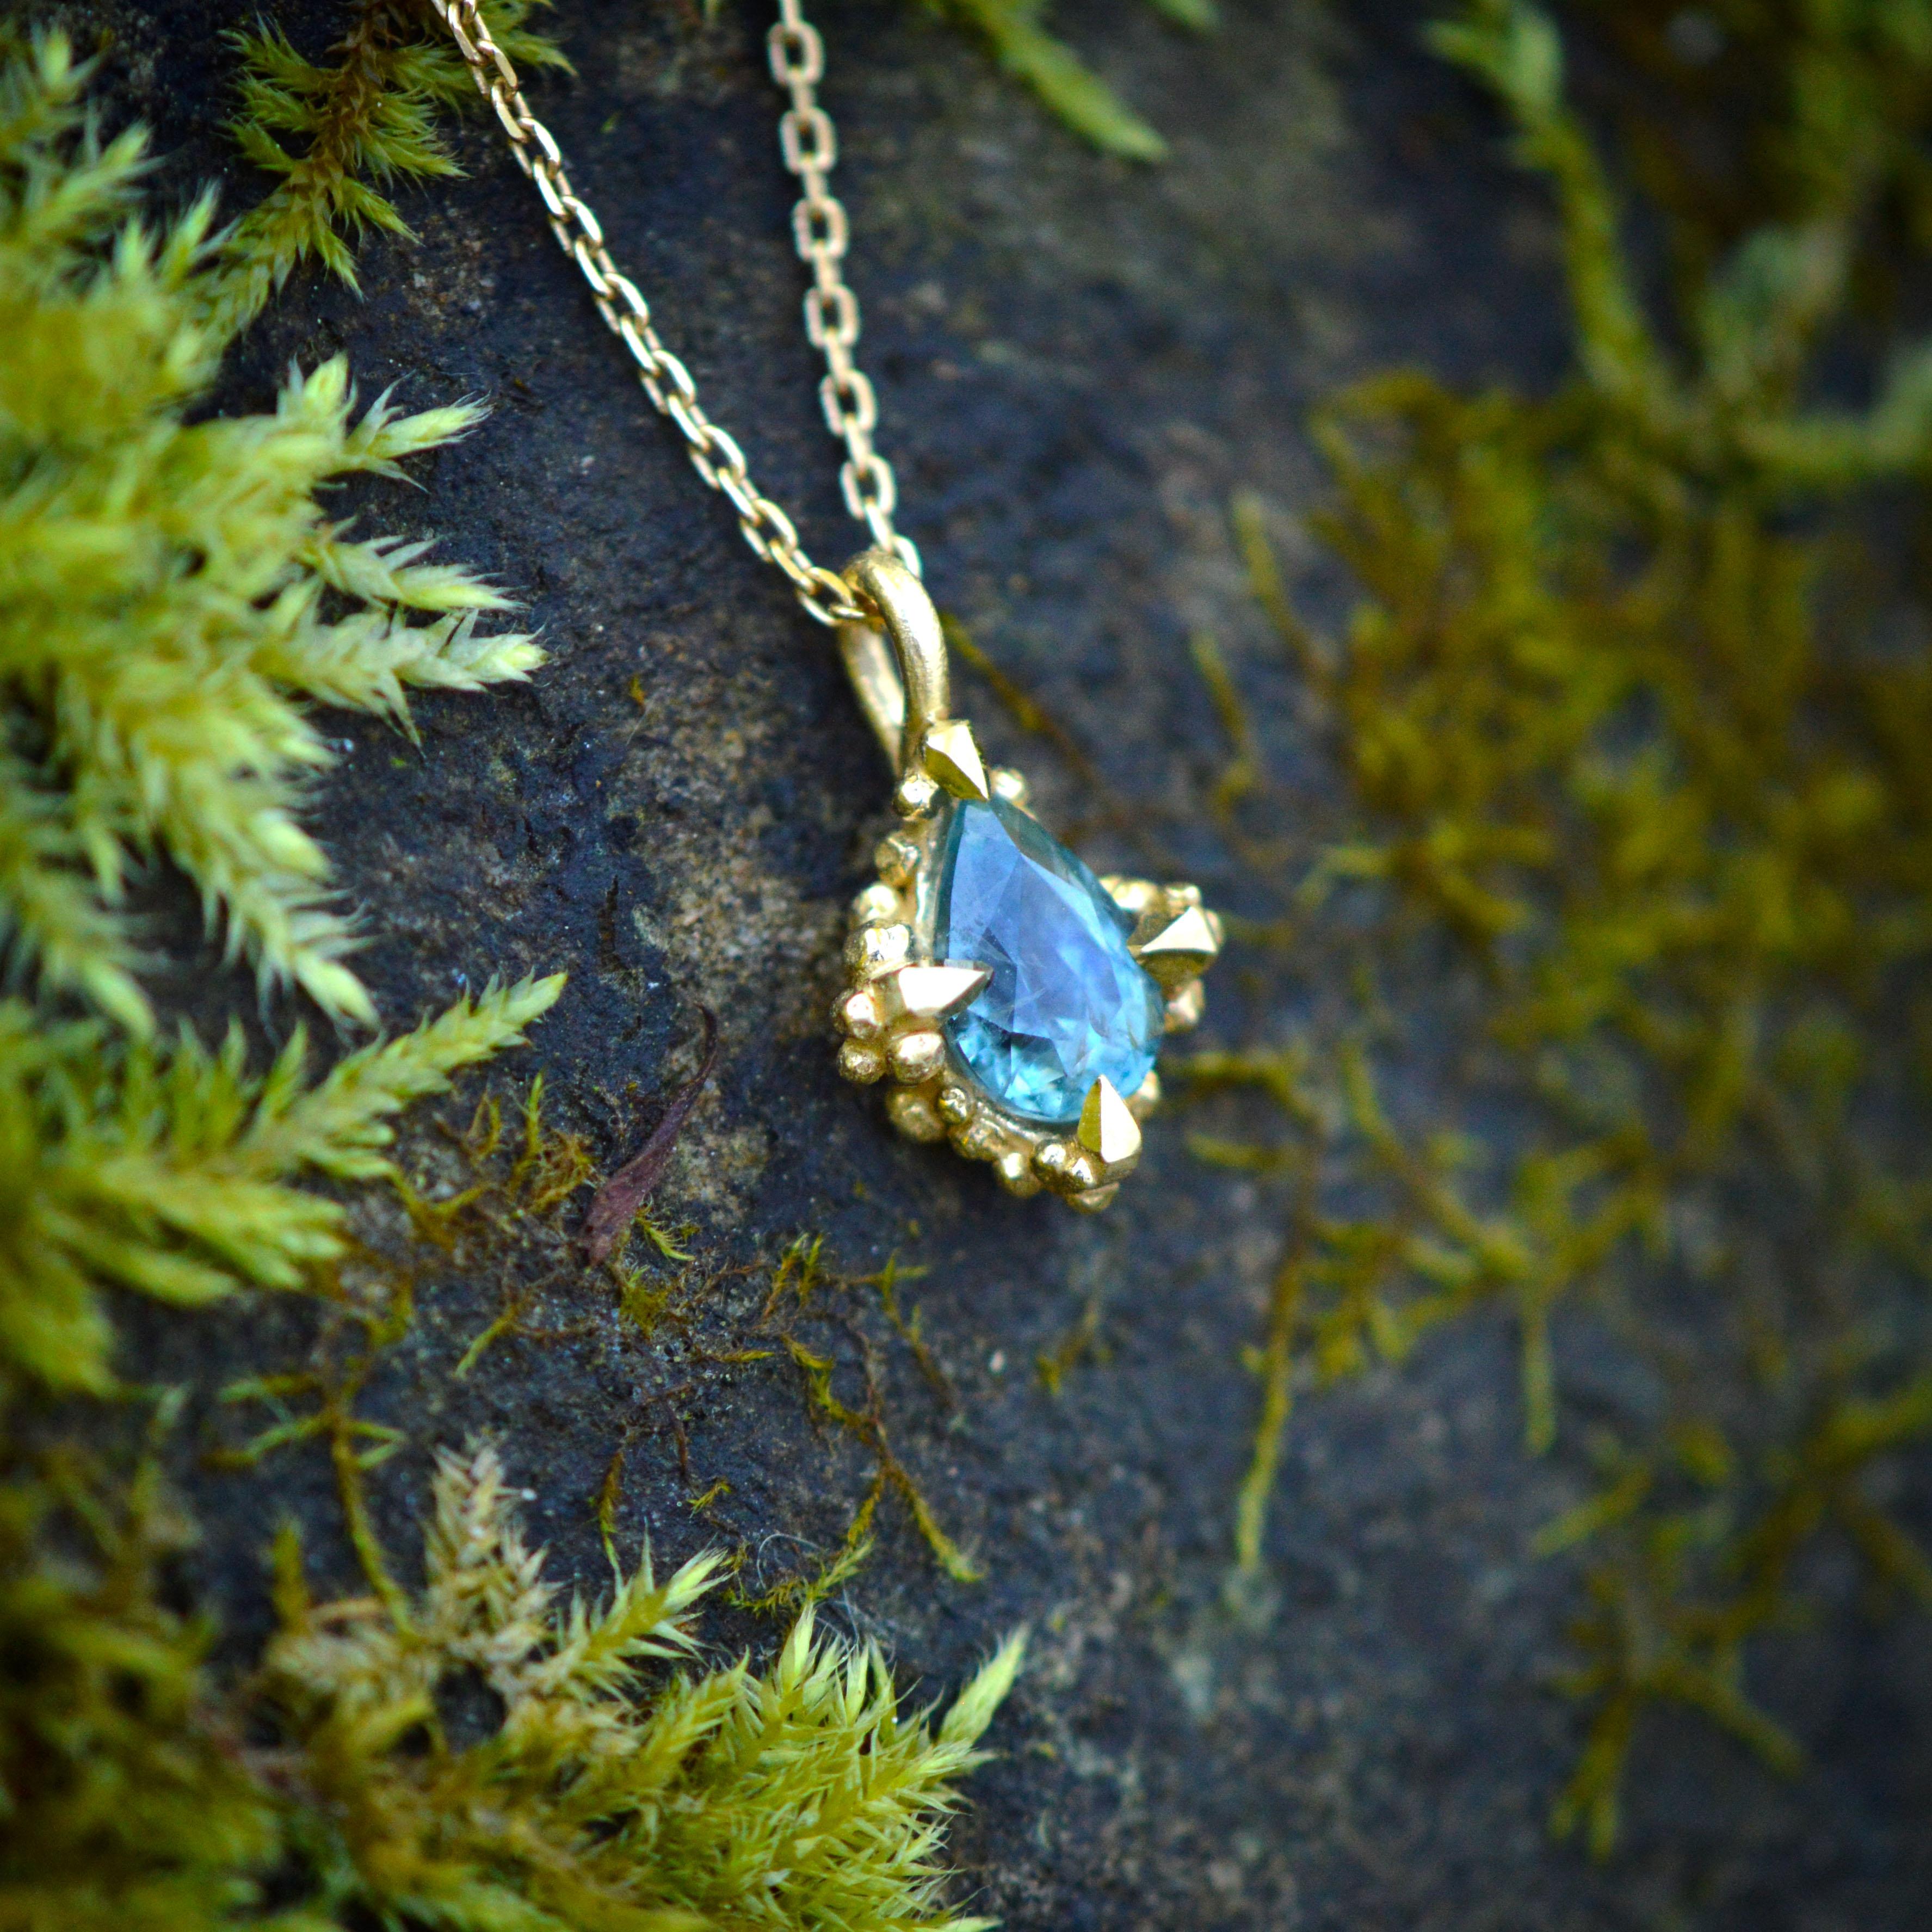 This gnarly ocean inspired pendant is cast in solid 18 carat gold, finished by hand, and set with a teardrop shaped teal sapphire. It is cast in solid 18 Carat gold and finished by hand, and is created from Lucy's original hand-sculpted design.